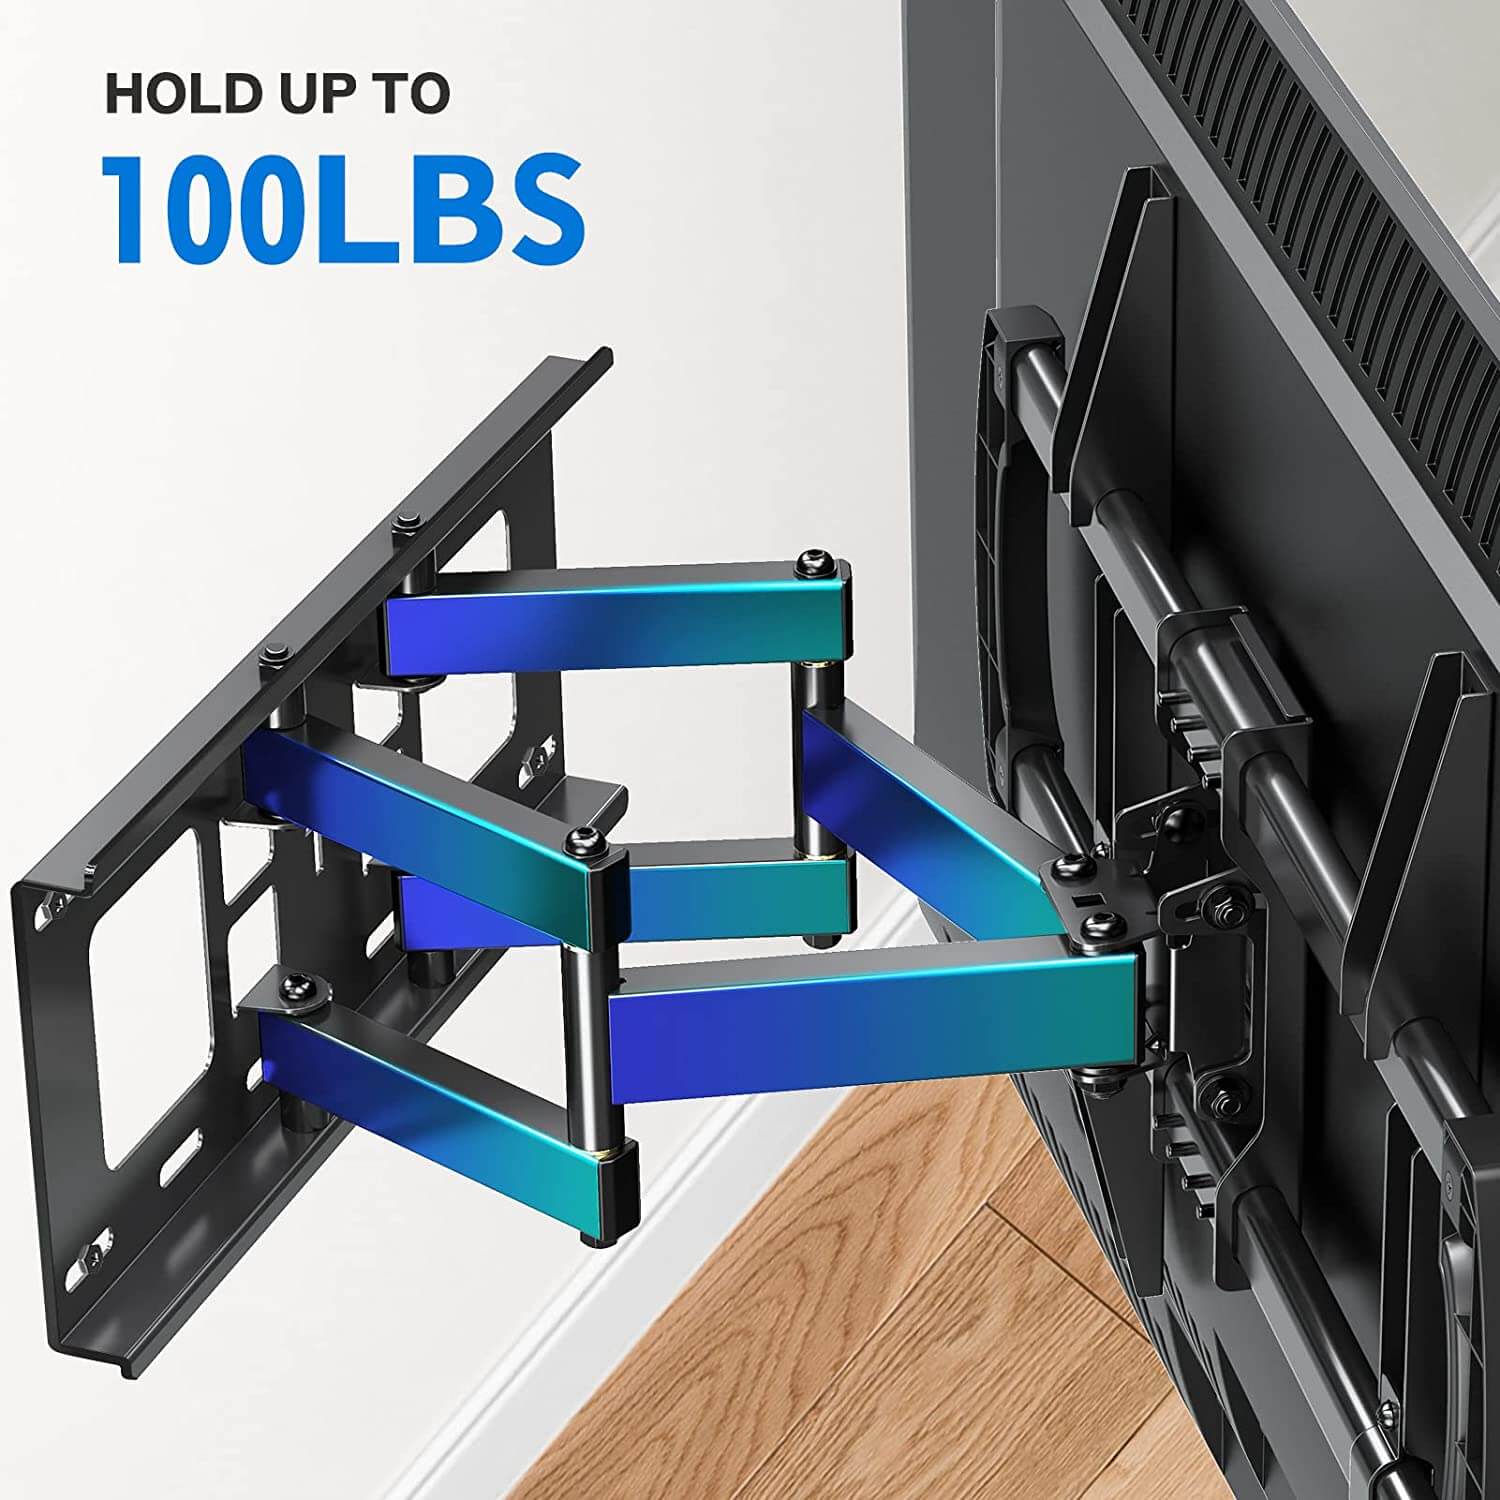 heavy duty TV wall mount holds up to 100 lbs.